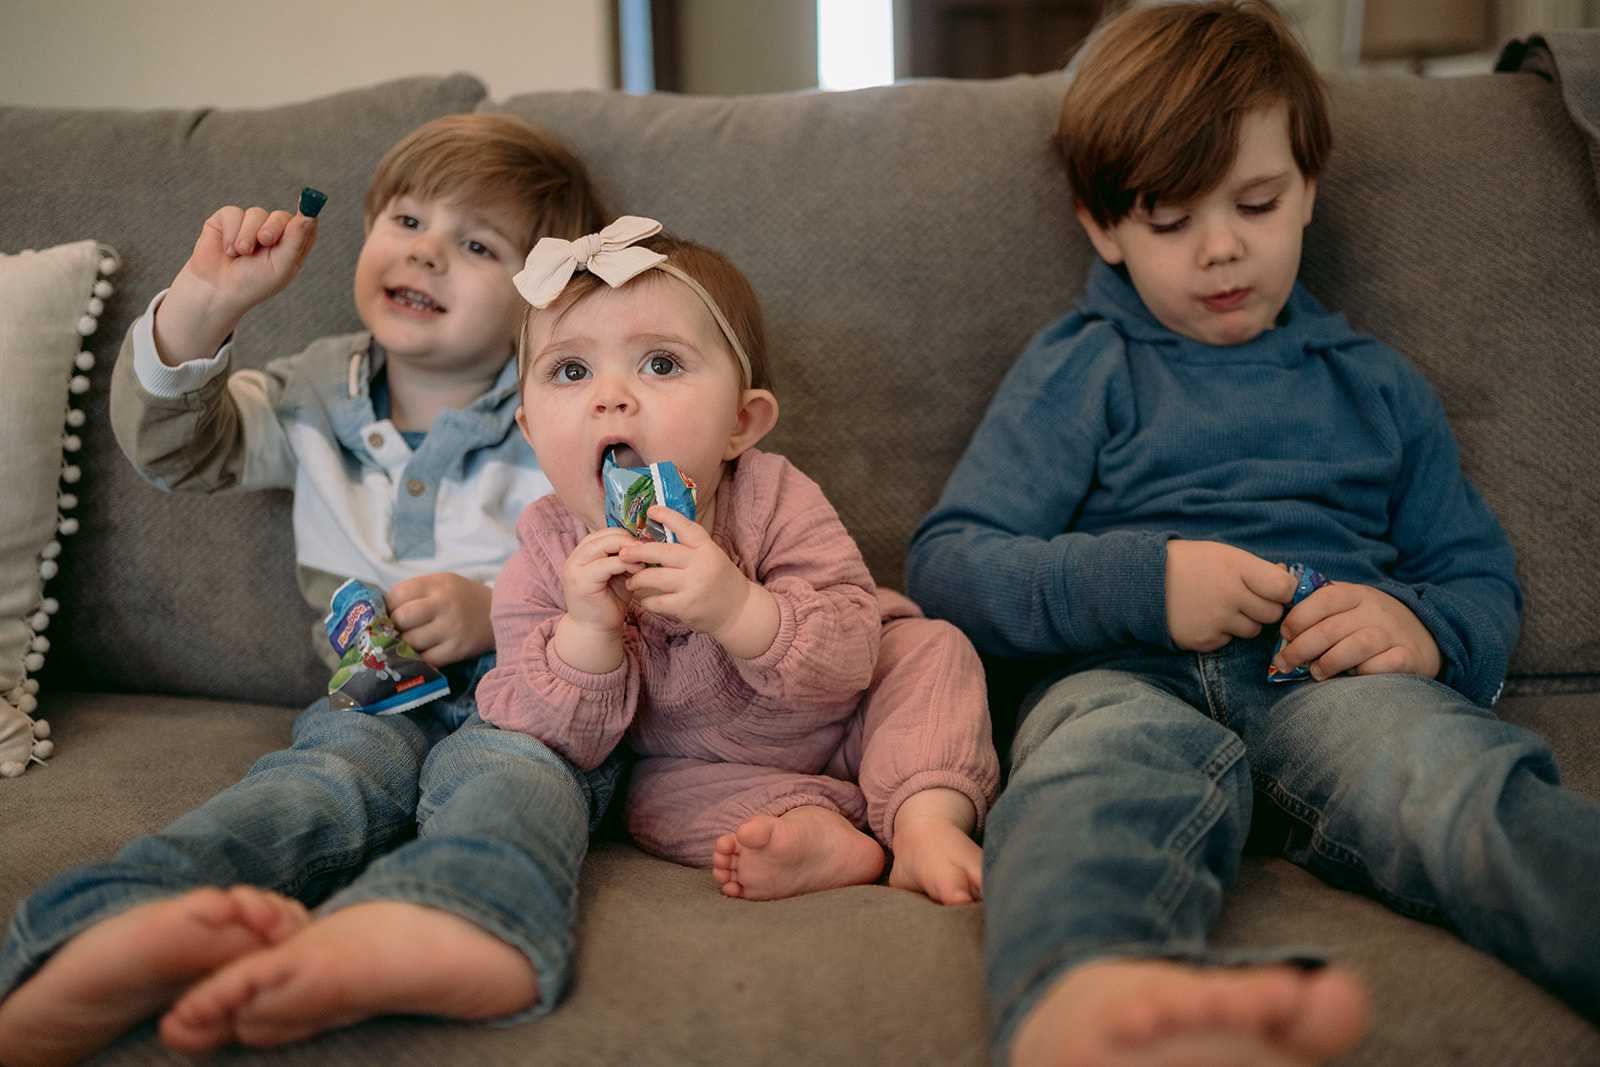 kids eating snacks on the couch